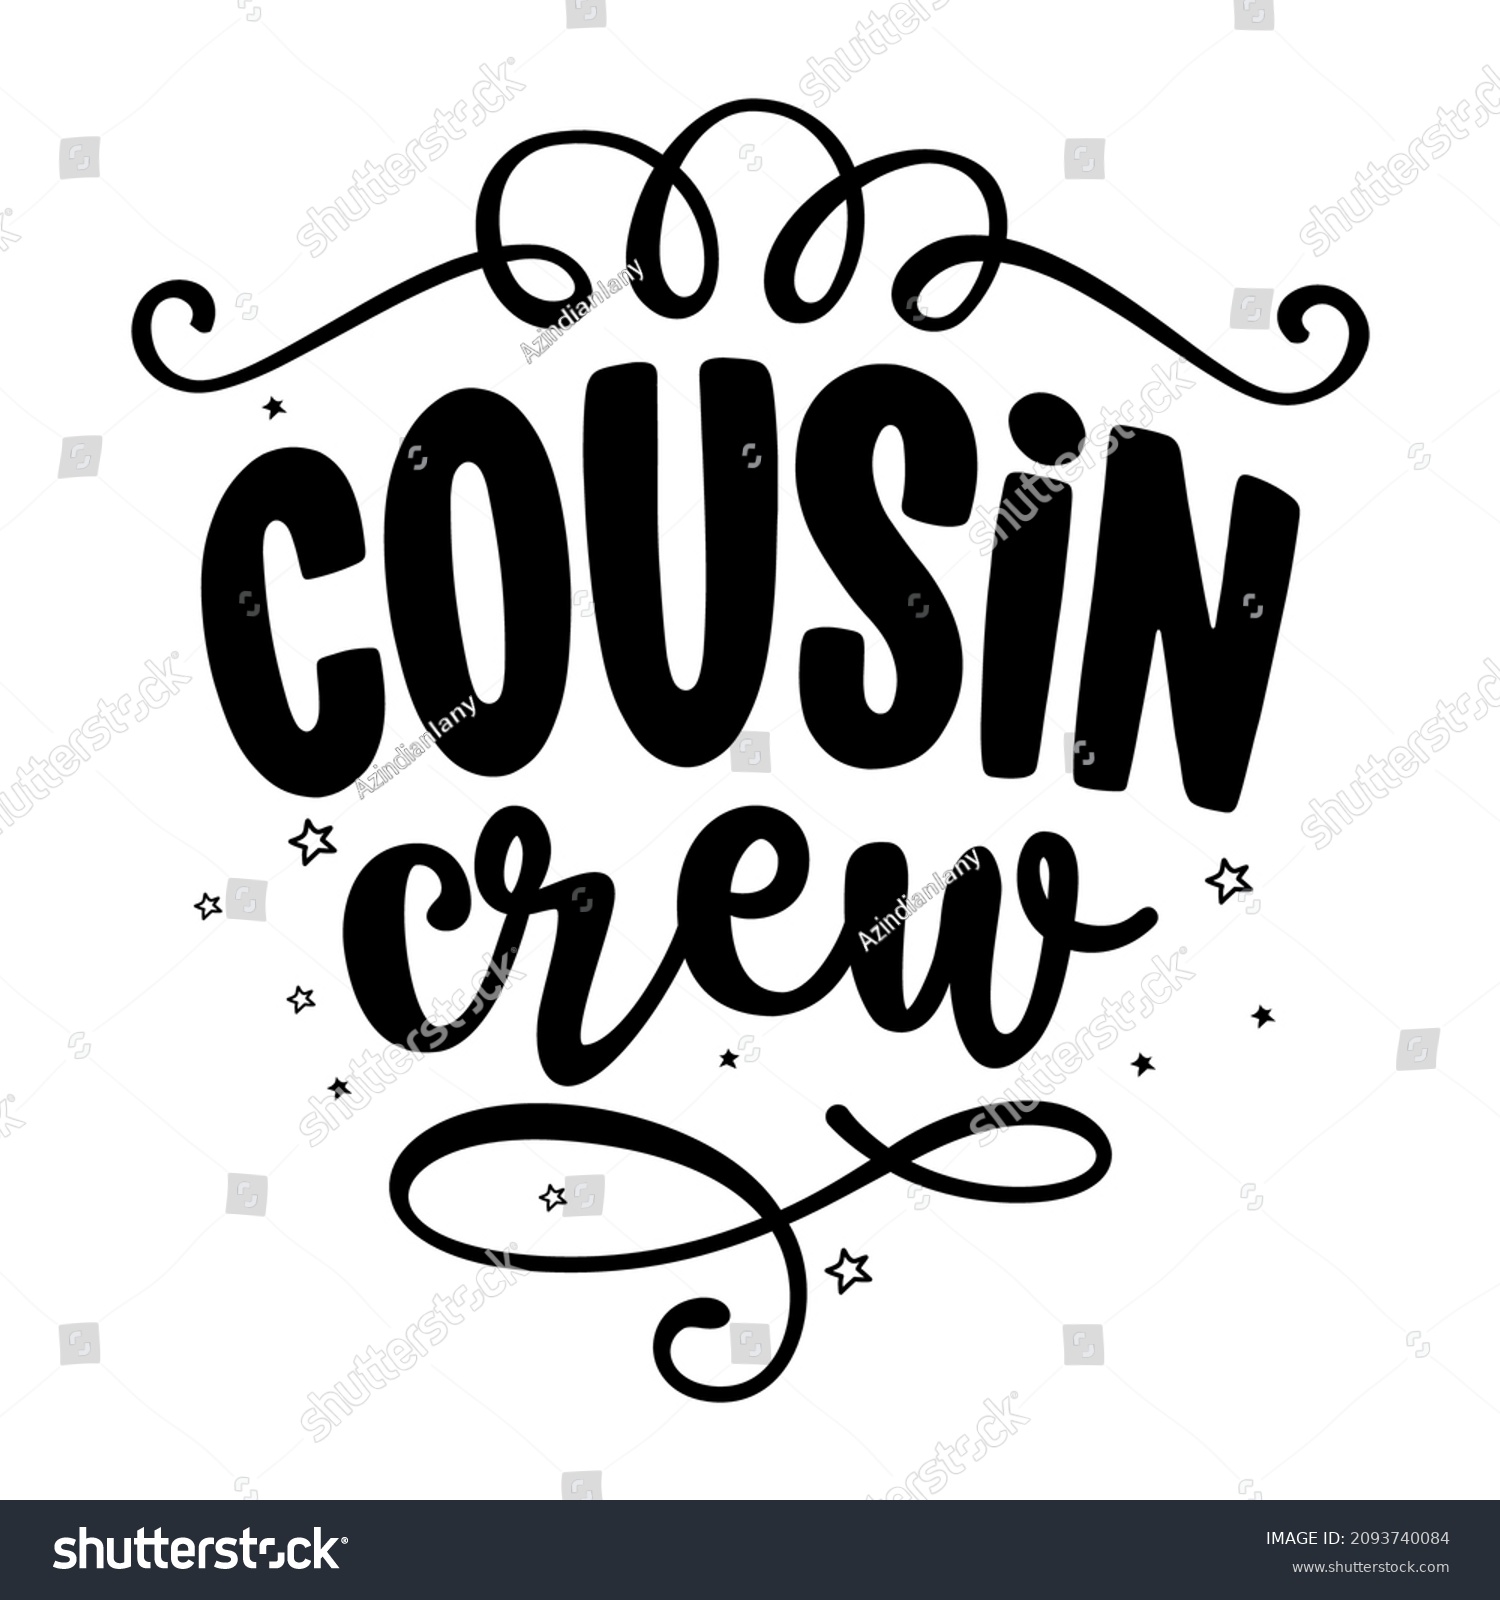 SVG of Cousin Crew - Christmas t shirt, lettering labels design. Cute badge. Hand drawn isolated emblem with quote. Xmas party sign or logo. scrap booking, posters, greeting cards, banners, textiles. svg